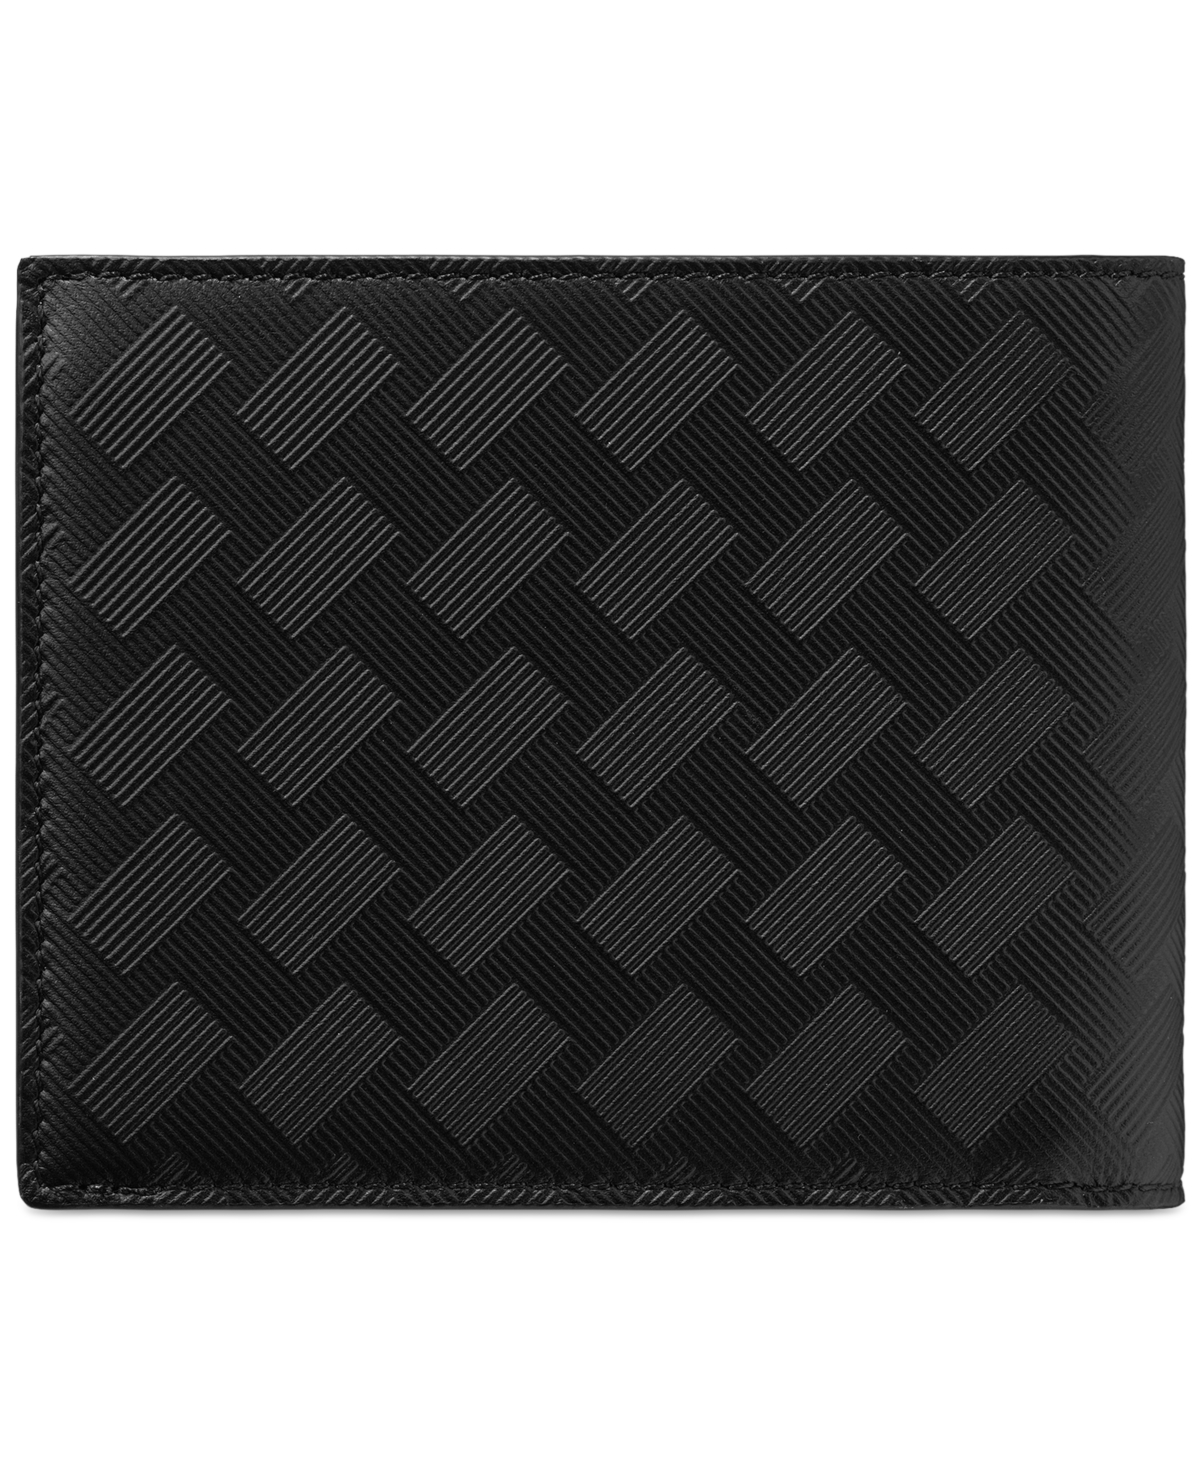 Montblanc Extreme 3.0 Leather Wallet In Black